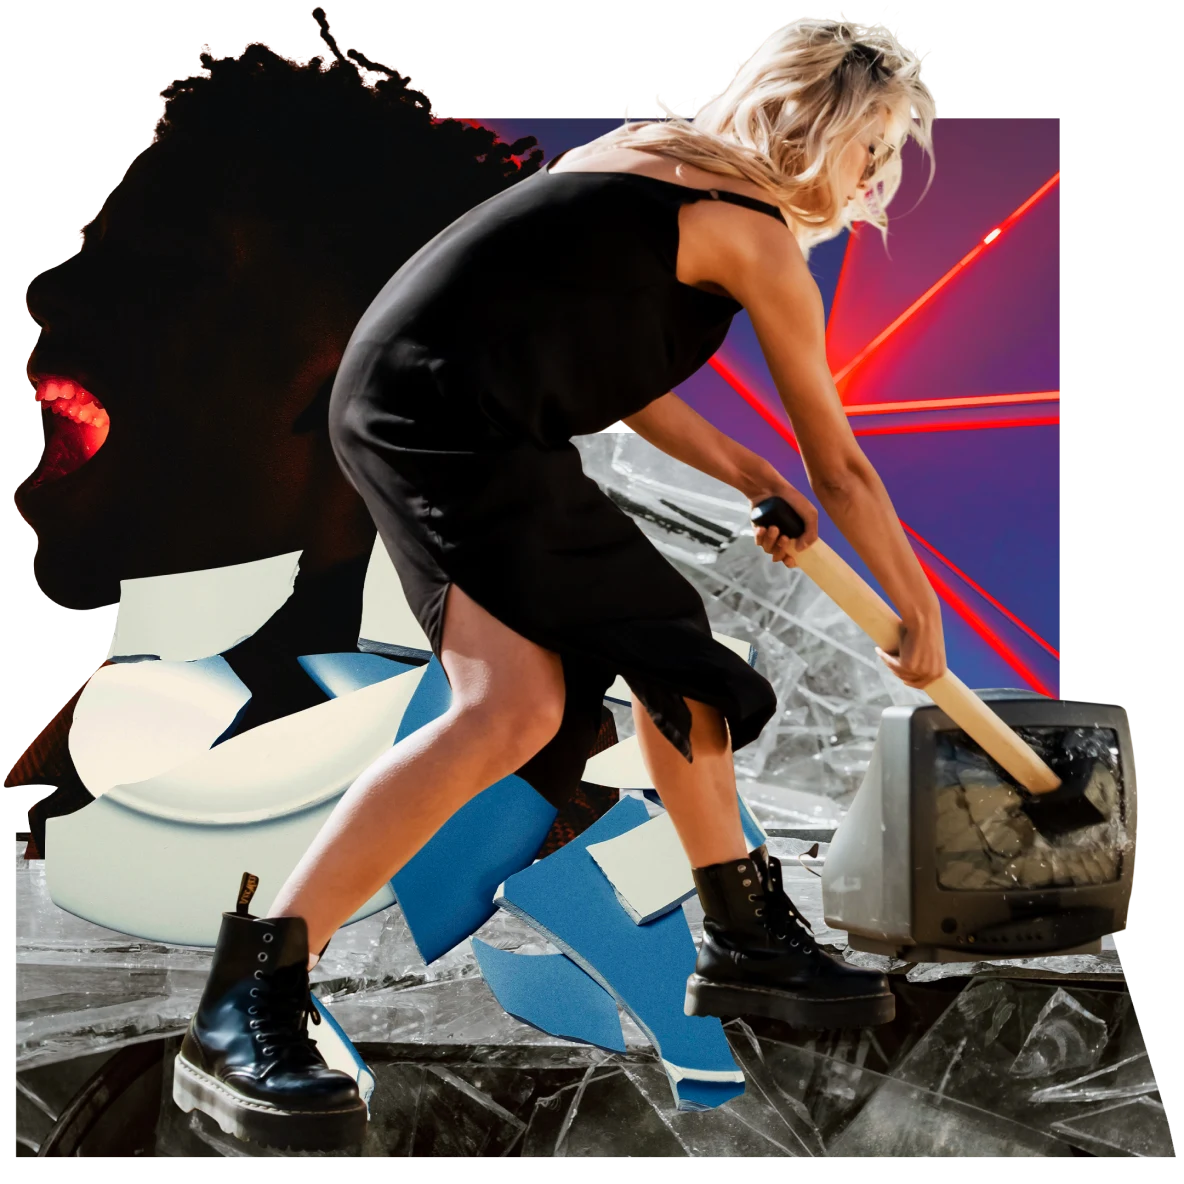 A white woman with long blonde hair, is wearing a black dress and black combat boots. She bends to smash a sledgehammer through a small TV screen. A silhouette of someone shouting is on the left. In the background, there are shards of navy blue, purple, white and red.